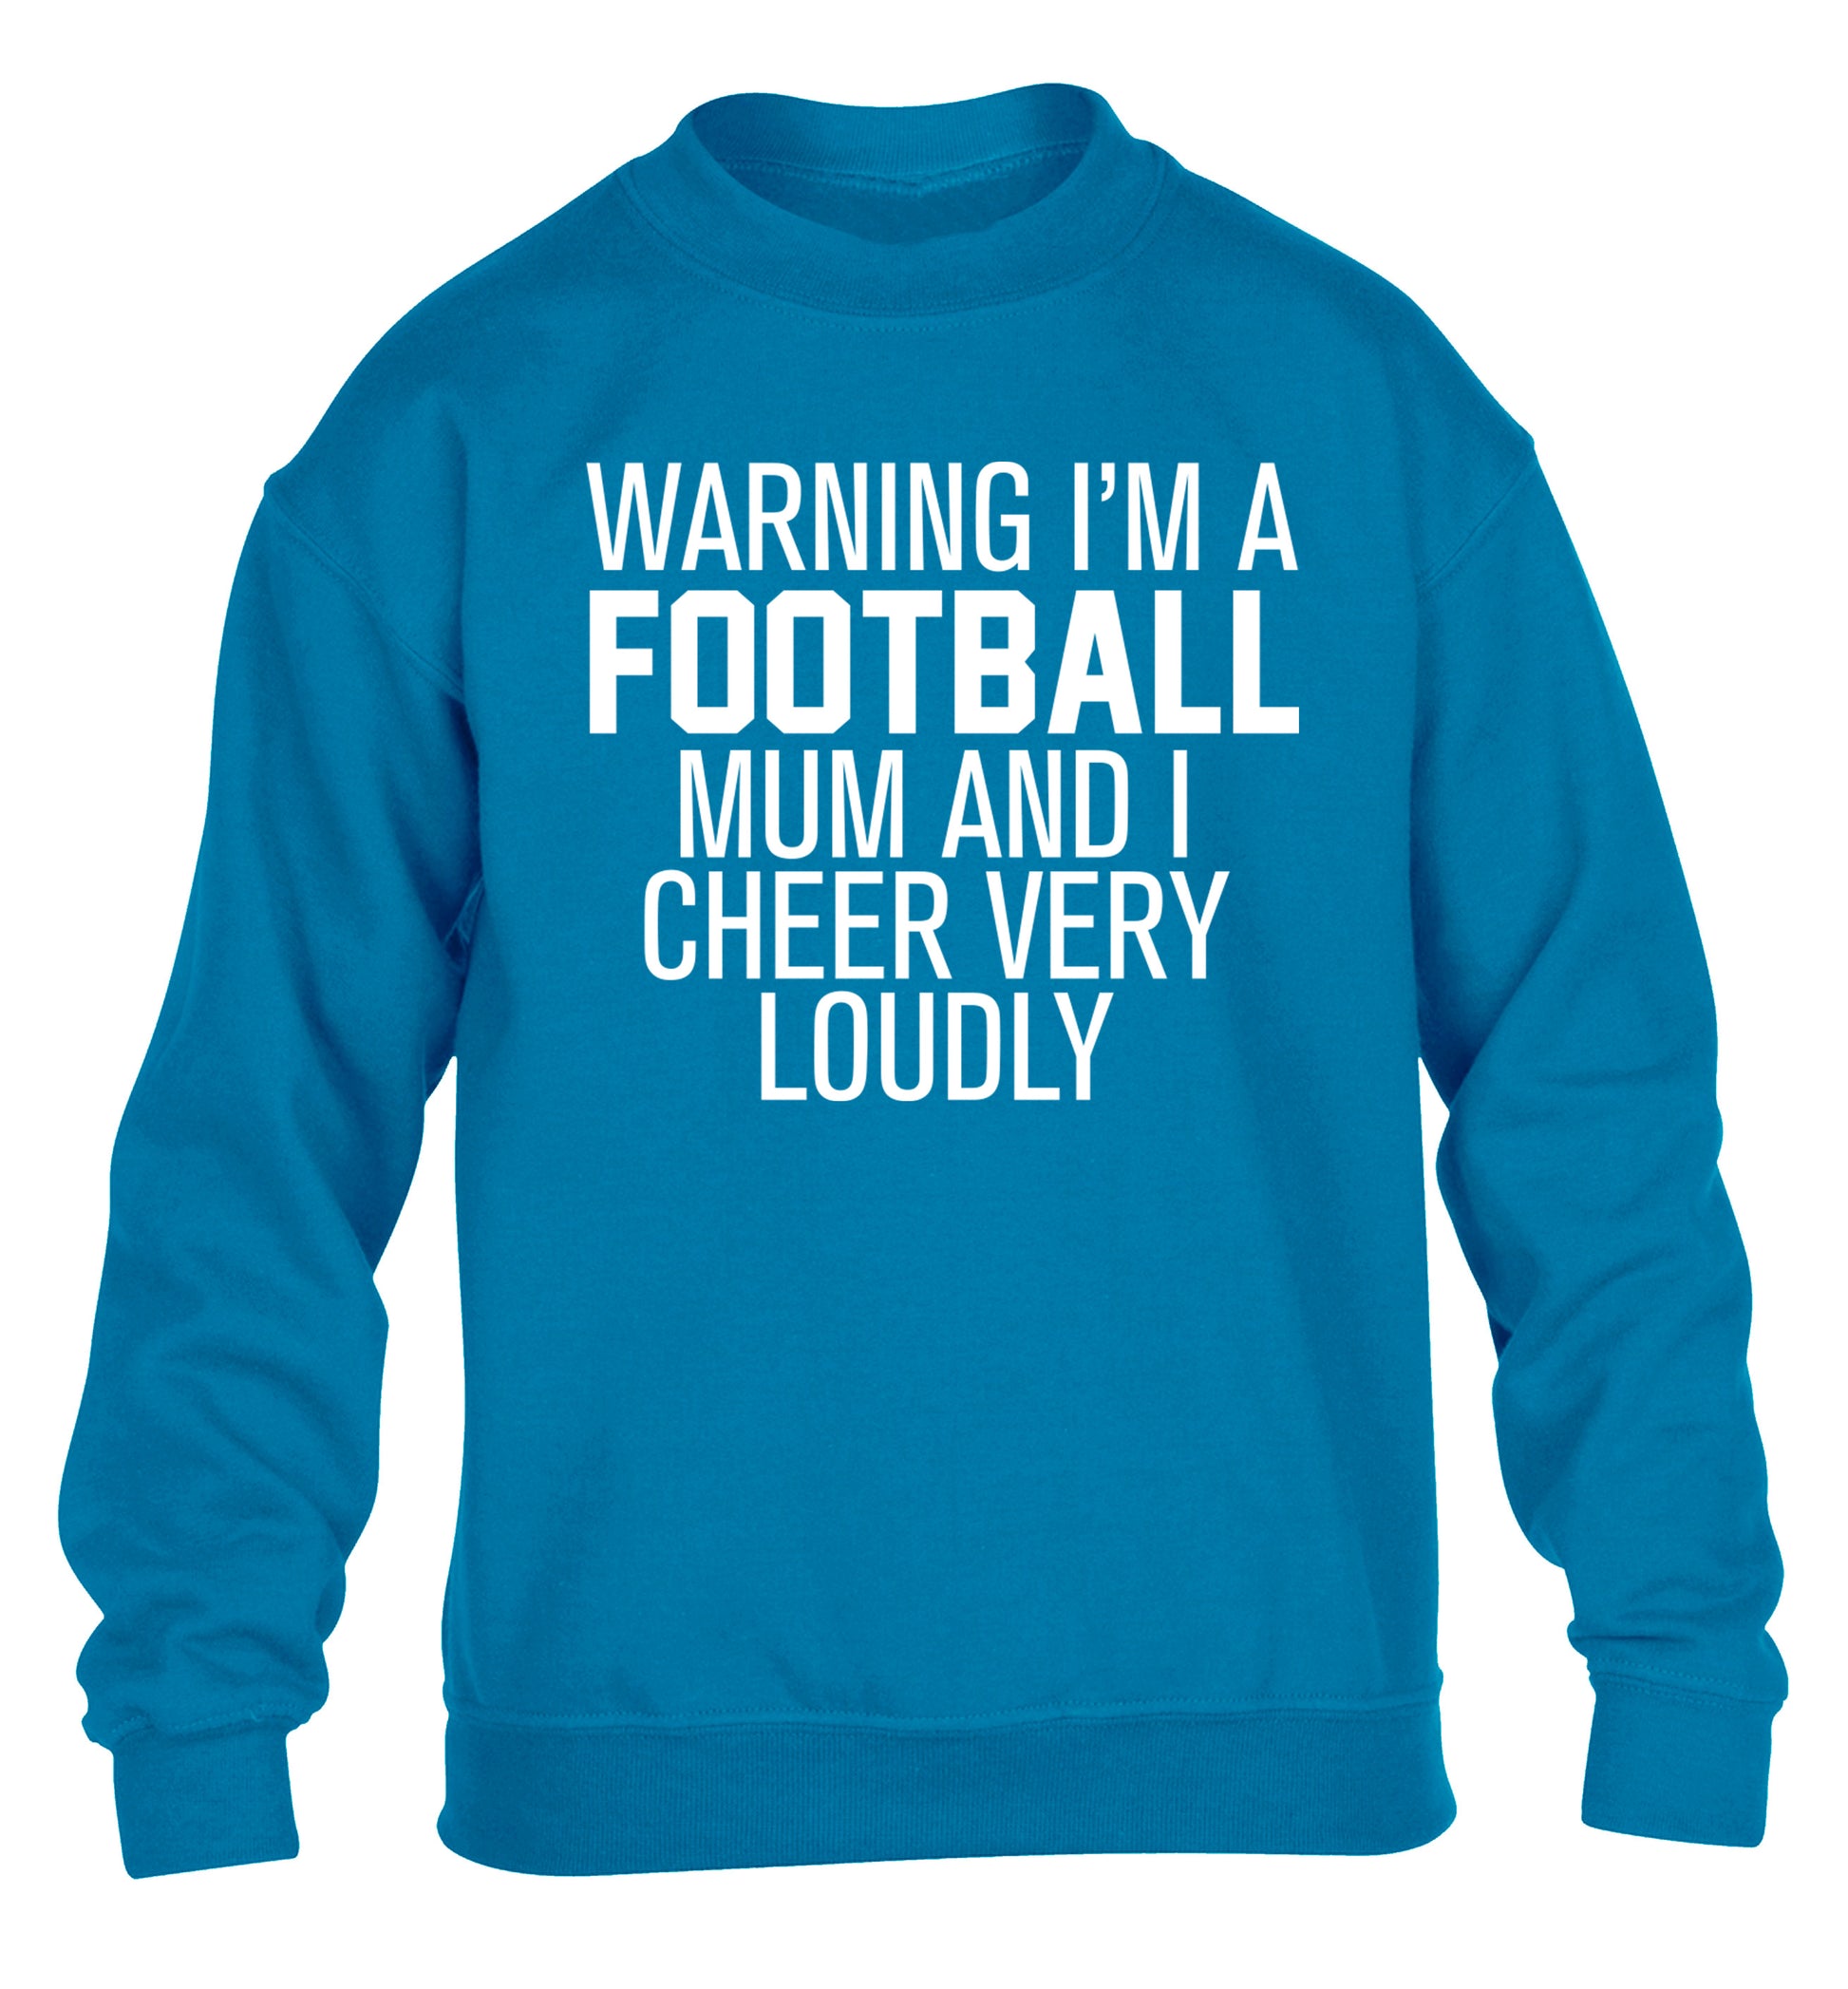 Warning I'm a football mum and I cheer very loudly children's blue sweater 12-14 Years